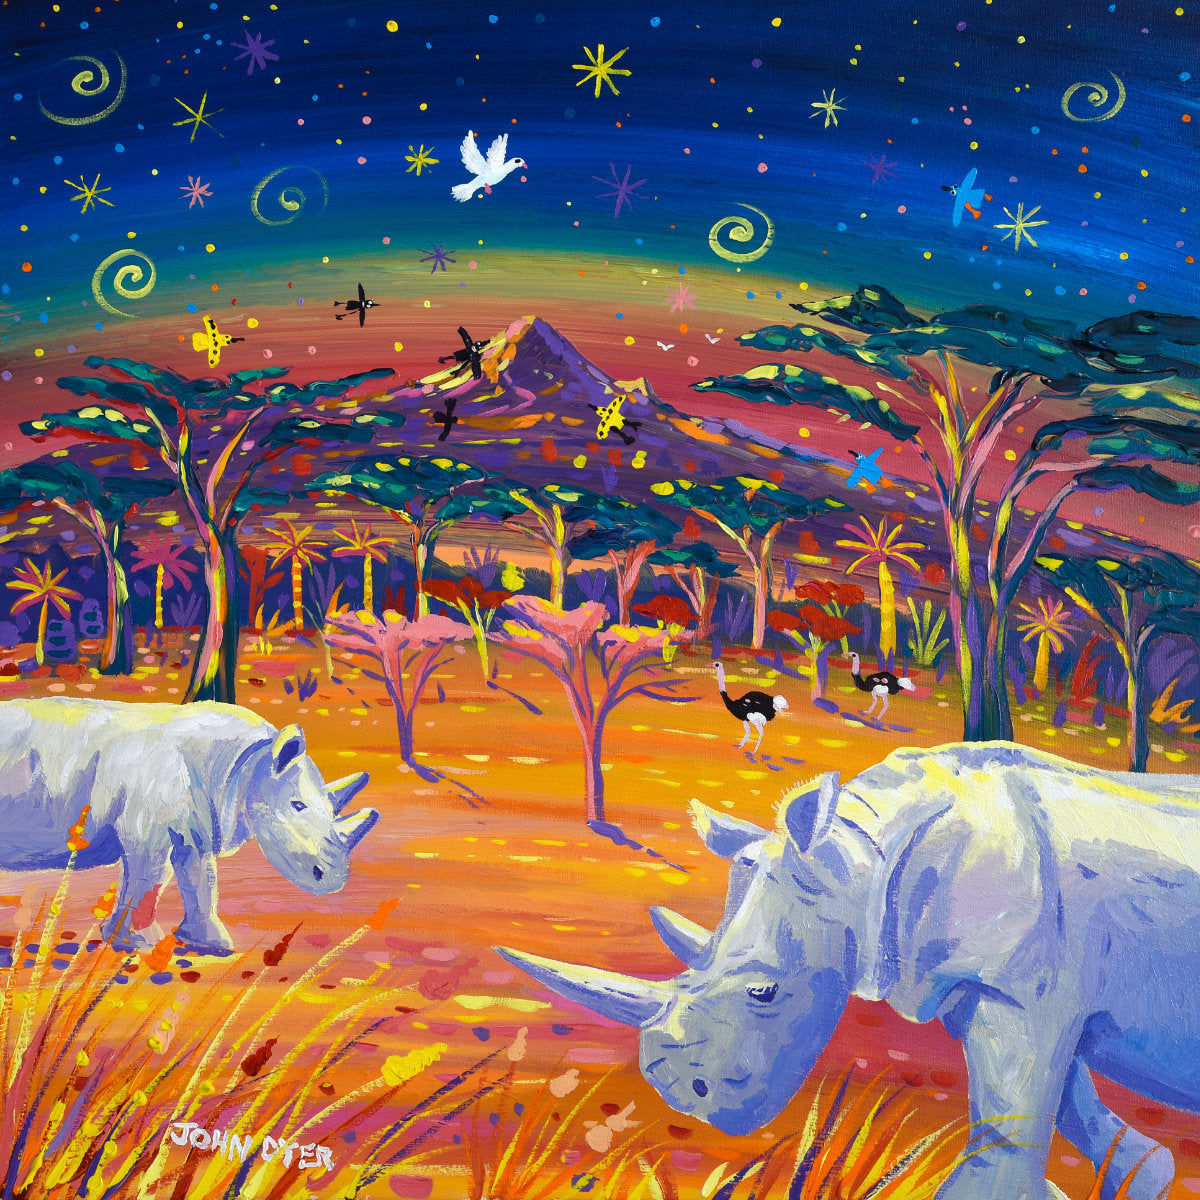 'Rhinos in Paradise, Najin & Fatu, the Last Two Northern White Rhino', 24x24 inches acrylic on canvas. African Painting by British Artist John Dyer.